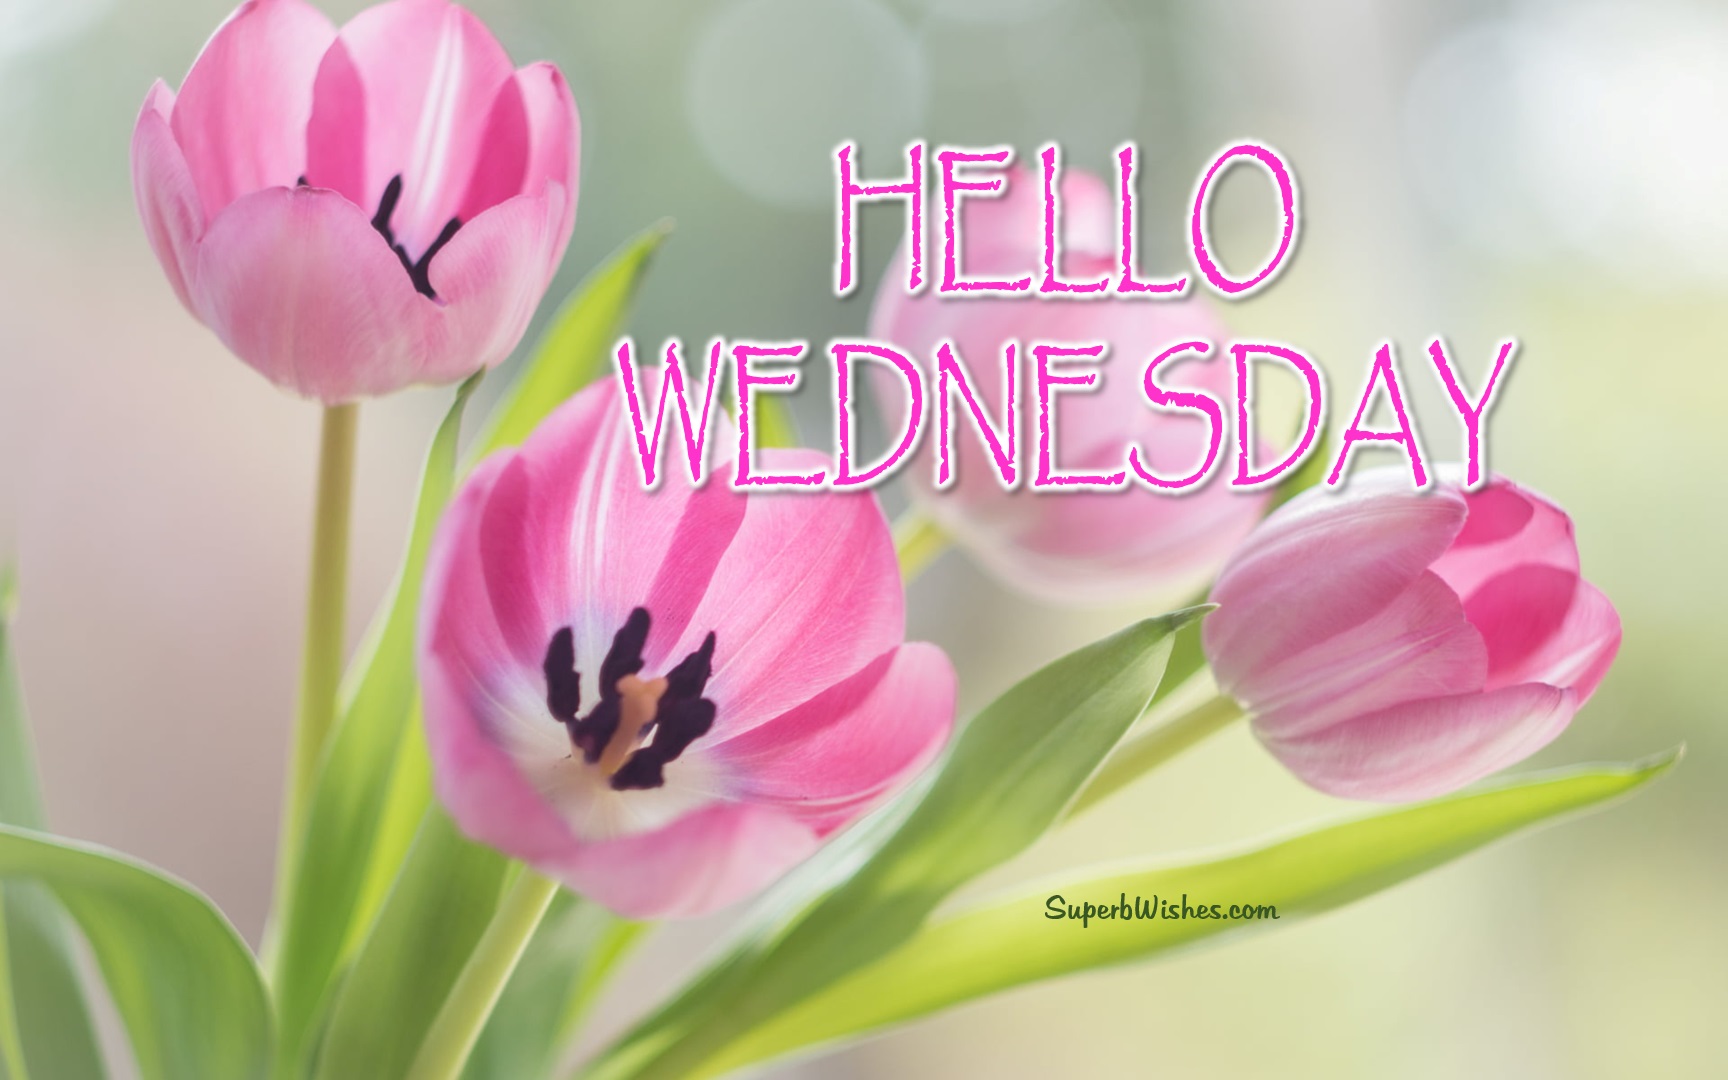 Happy Wednesday flowers images. Superbwishes.com